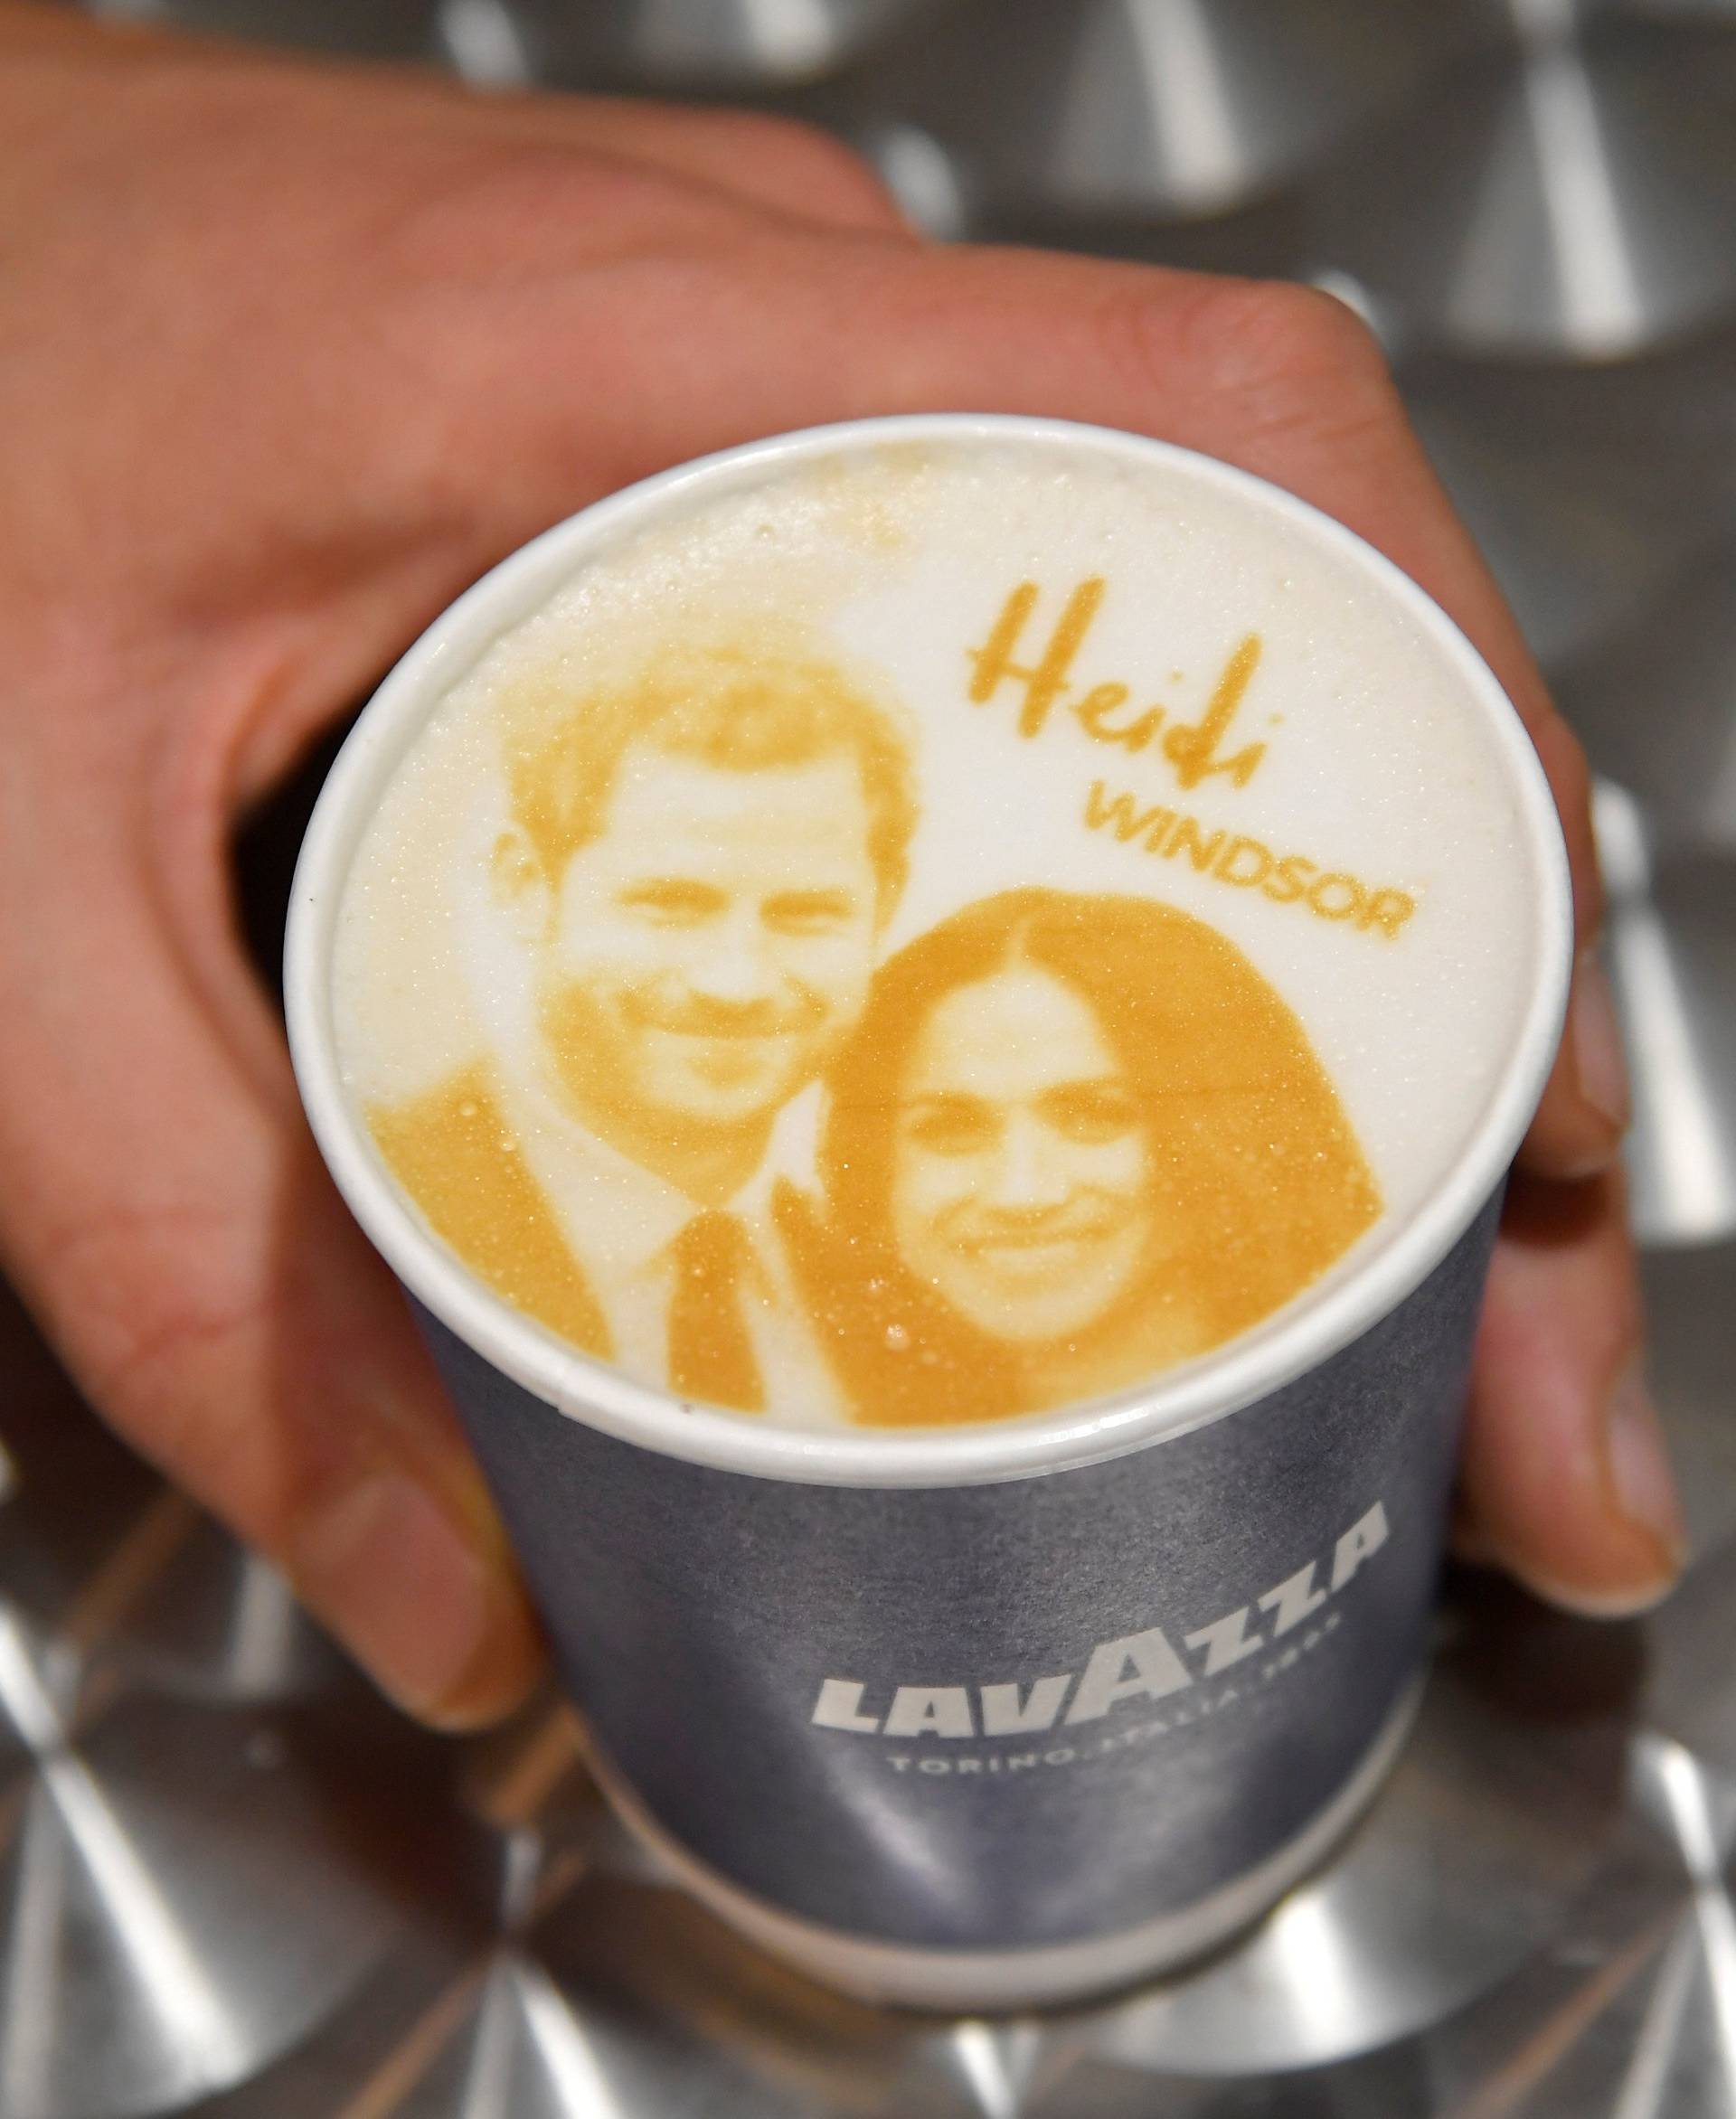 An image of Britain's Prince Harry and his fiancee Meghan Markle is seen on top of a cup of coffee being sold ahead of their forthcoming wedding in Windsor, Britain